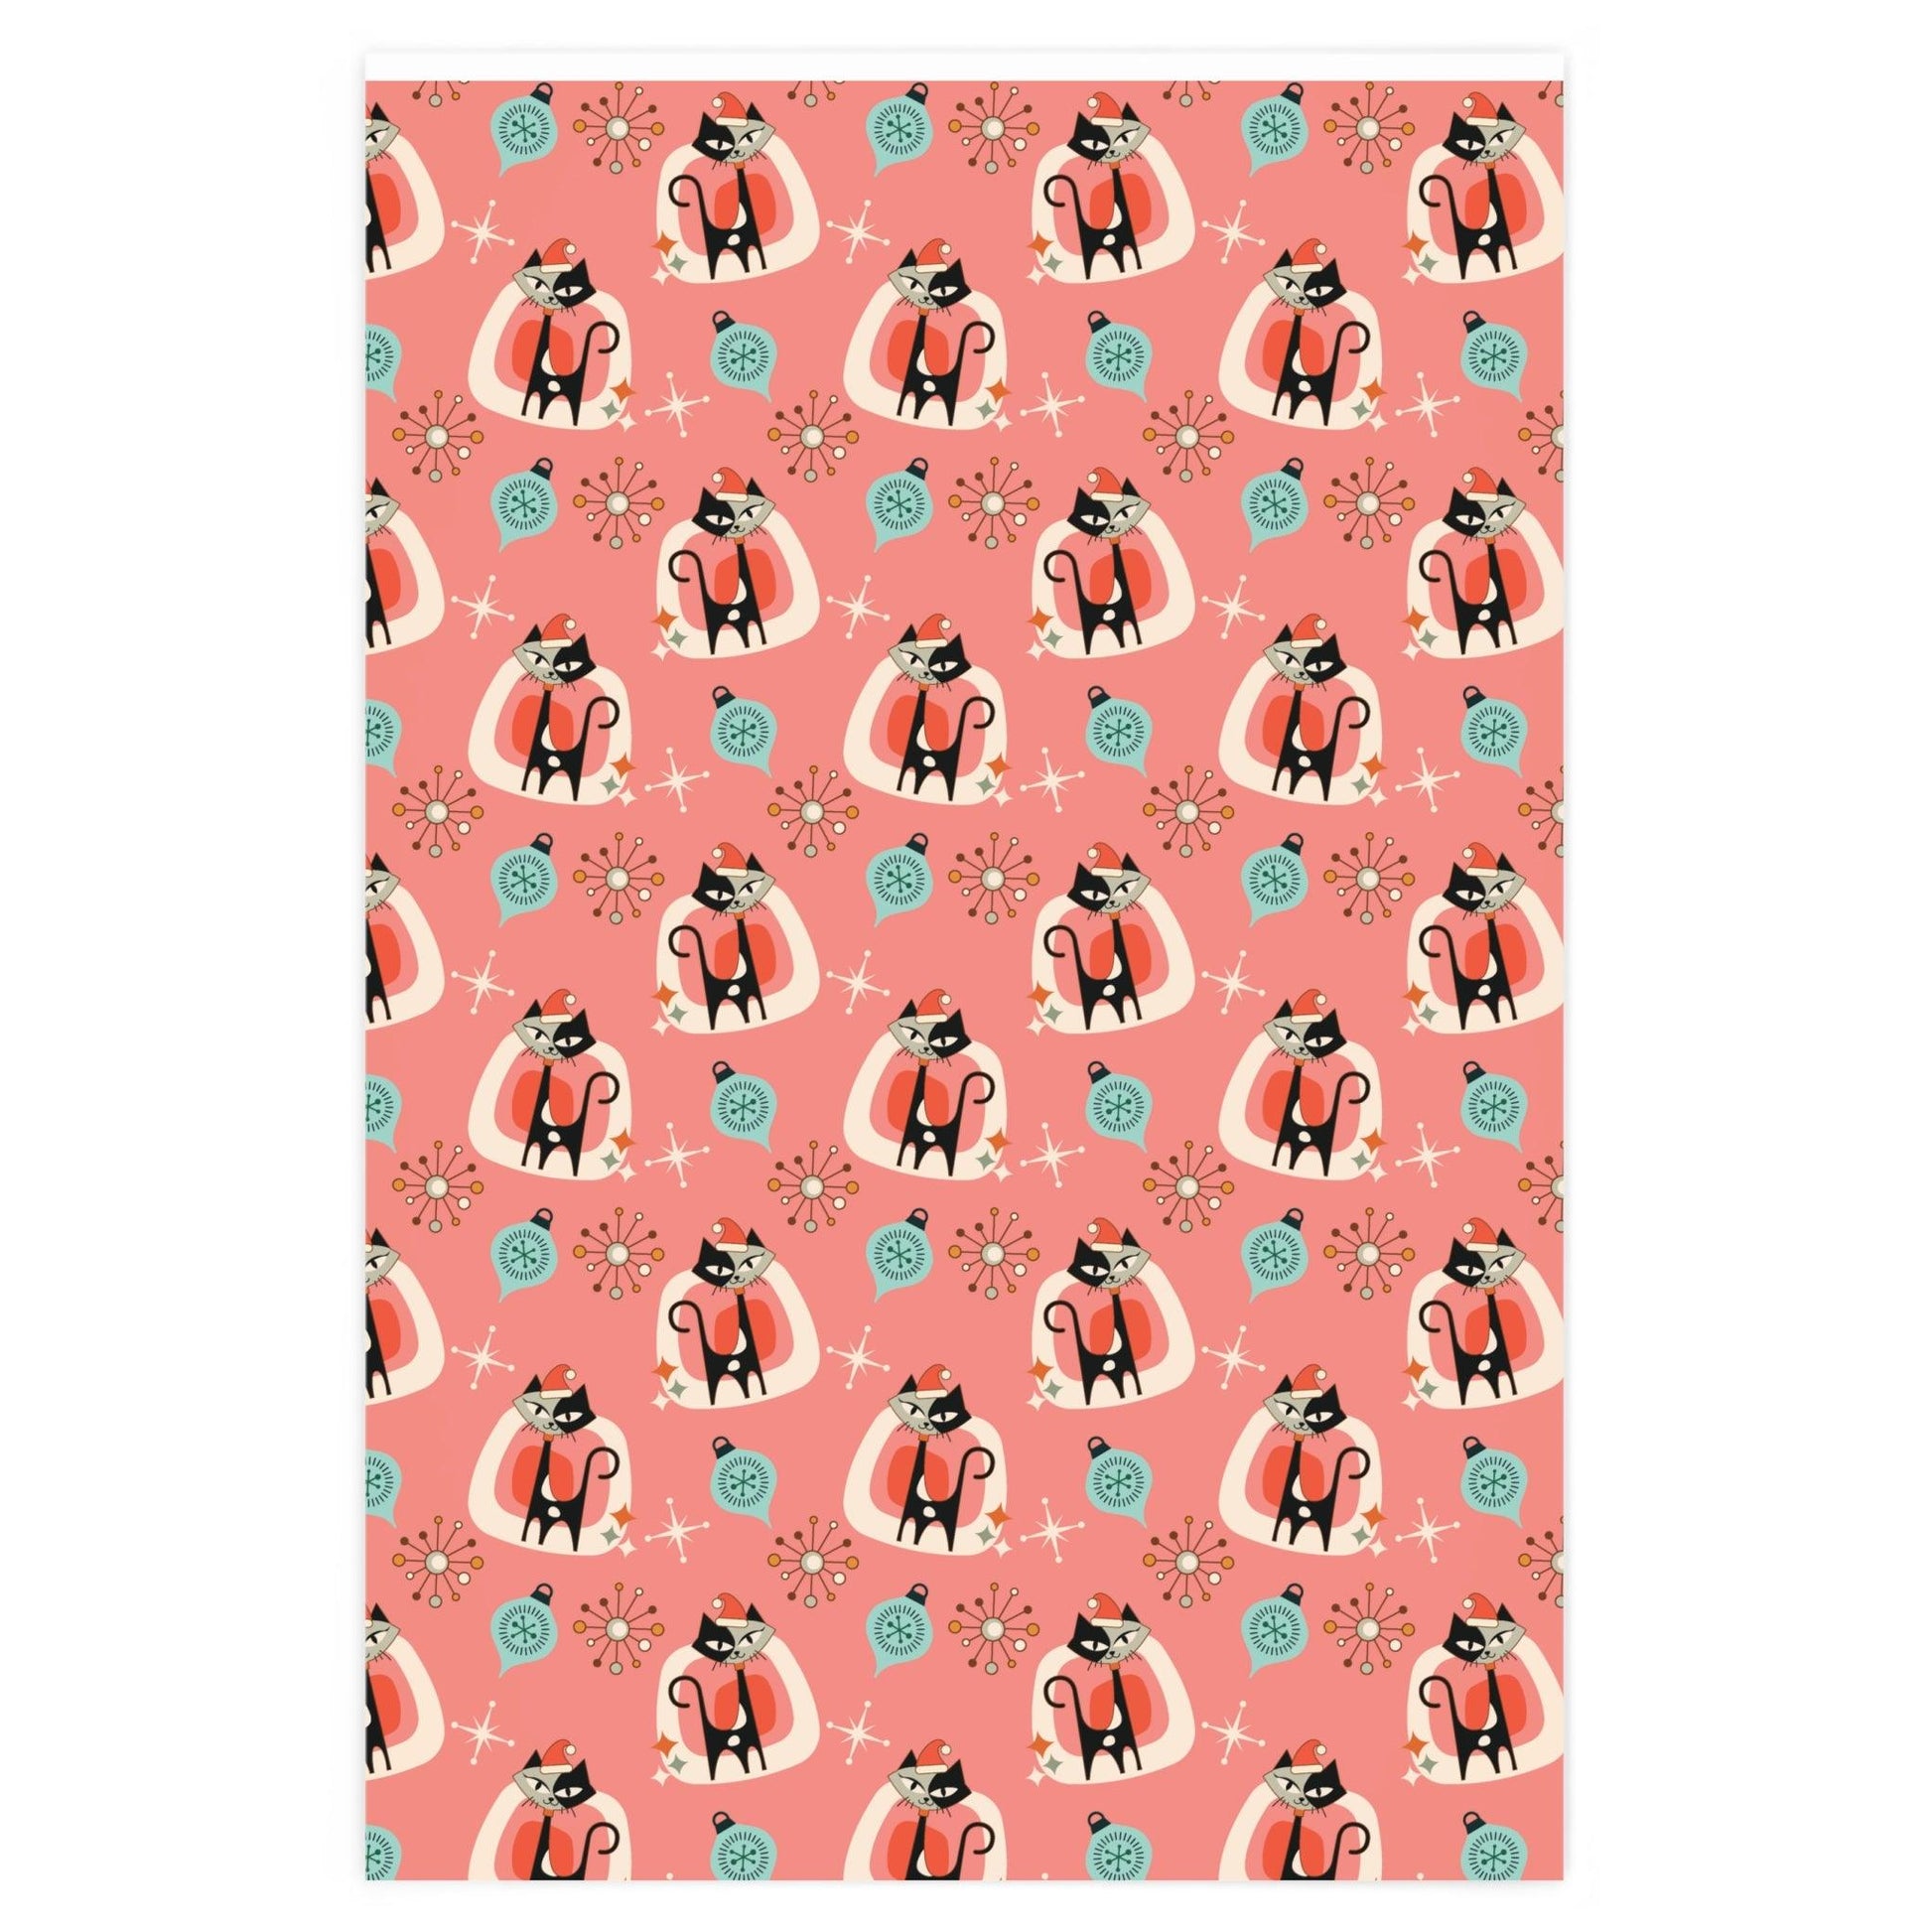 Retro Atomic Cats Mid Century Mod 1950s Christmas Pink Coral Wrapping Paper | lovevisionkarma.com